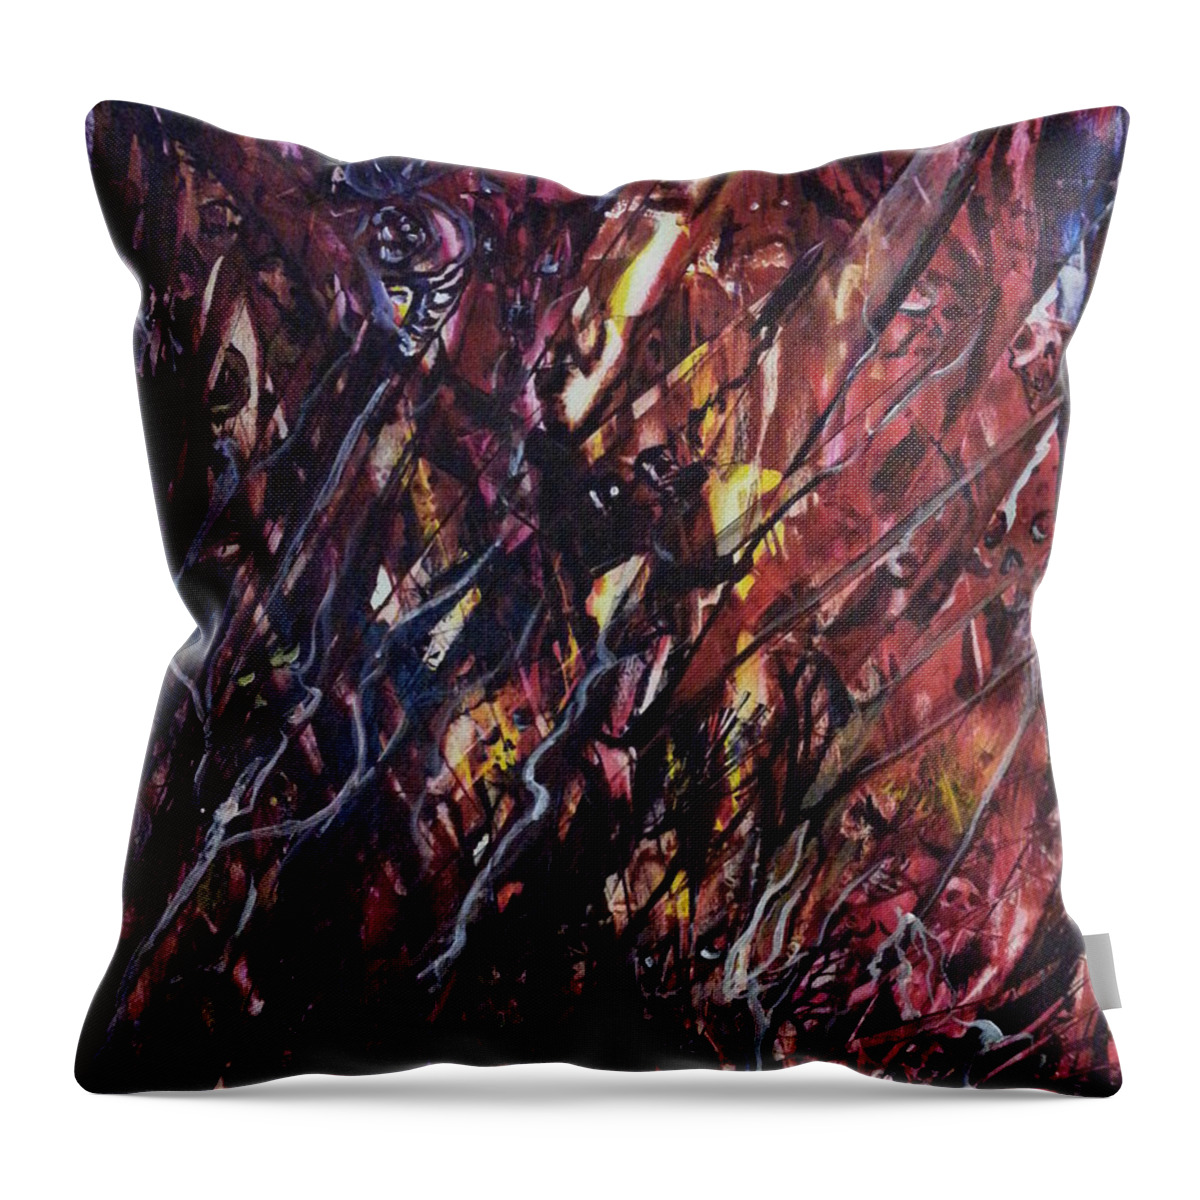 Sadistic Vision By Reed Novotny Throw Pillow featuring the painting Sadistic Vision by Reed Novotny